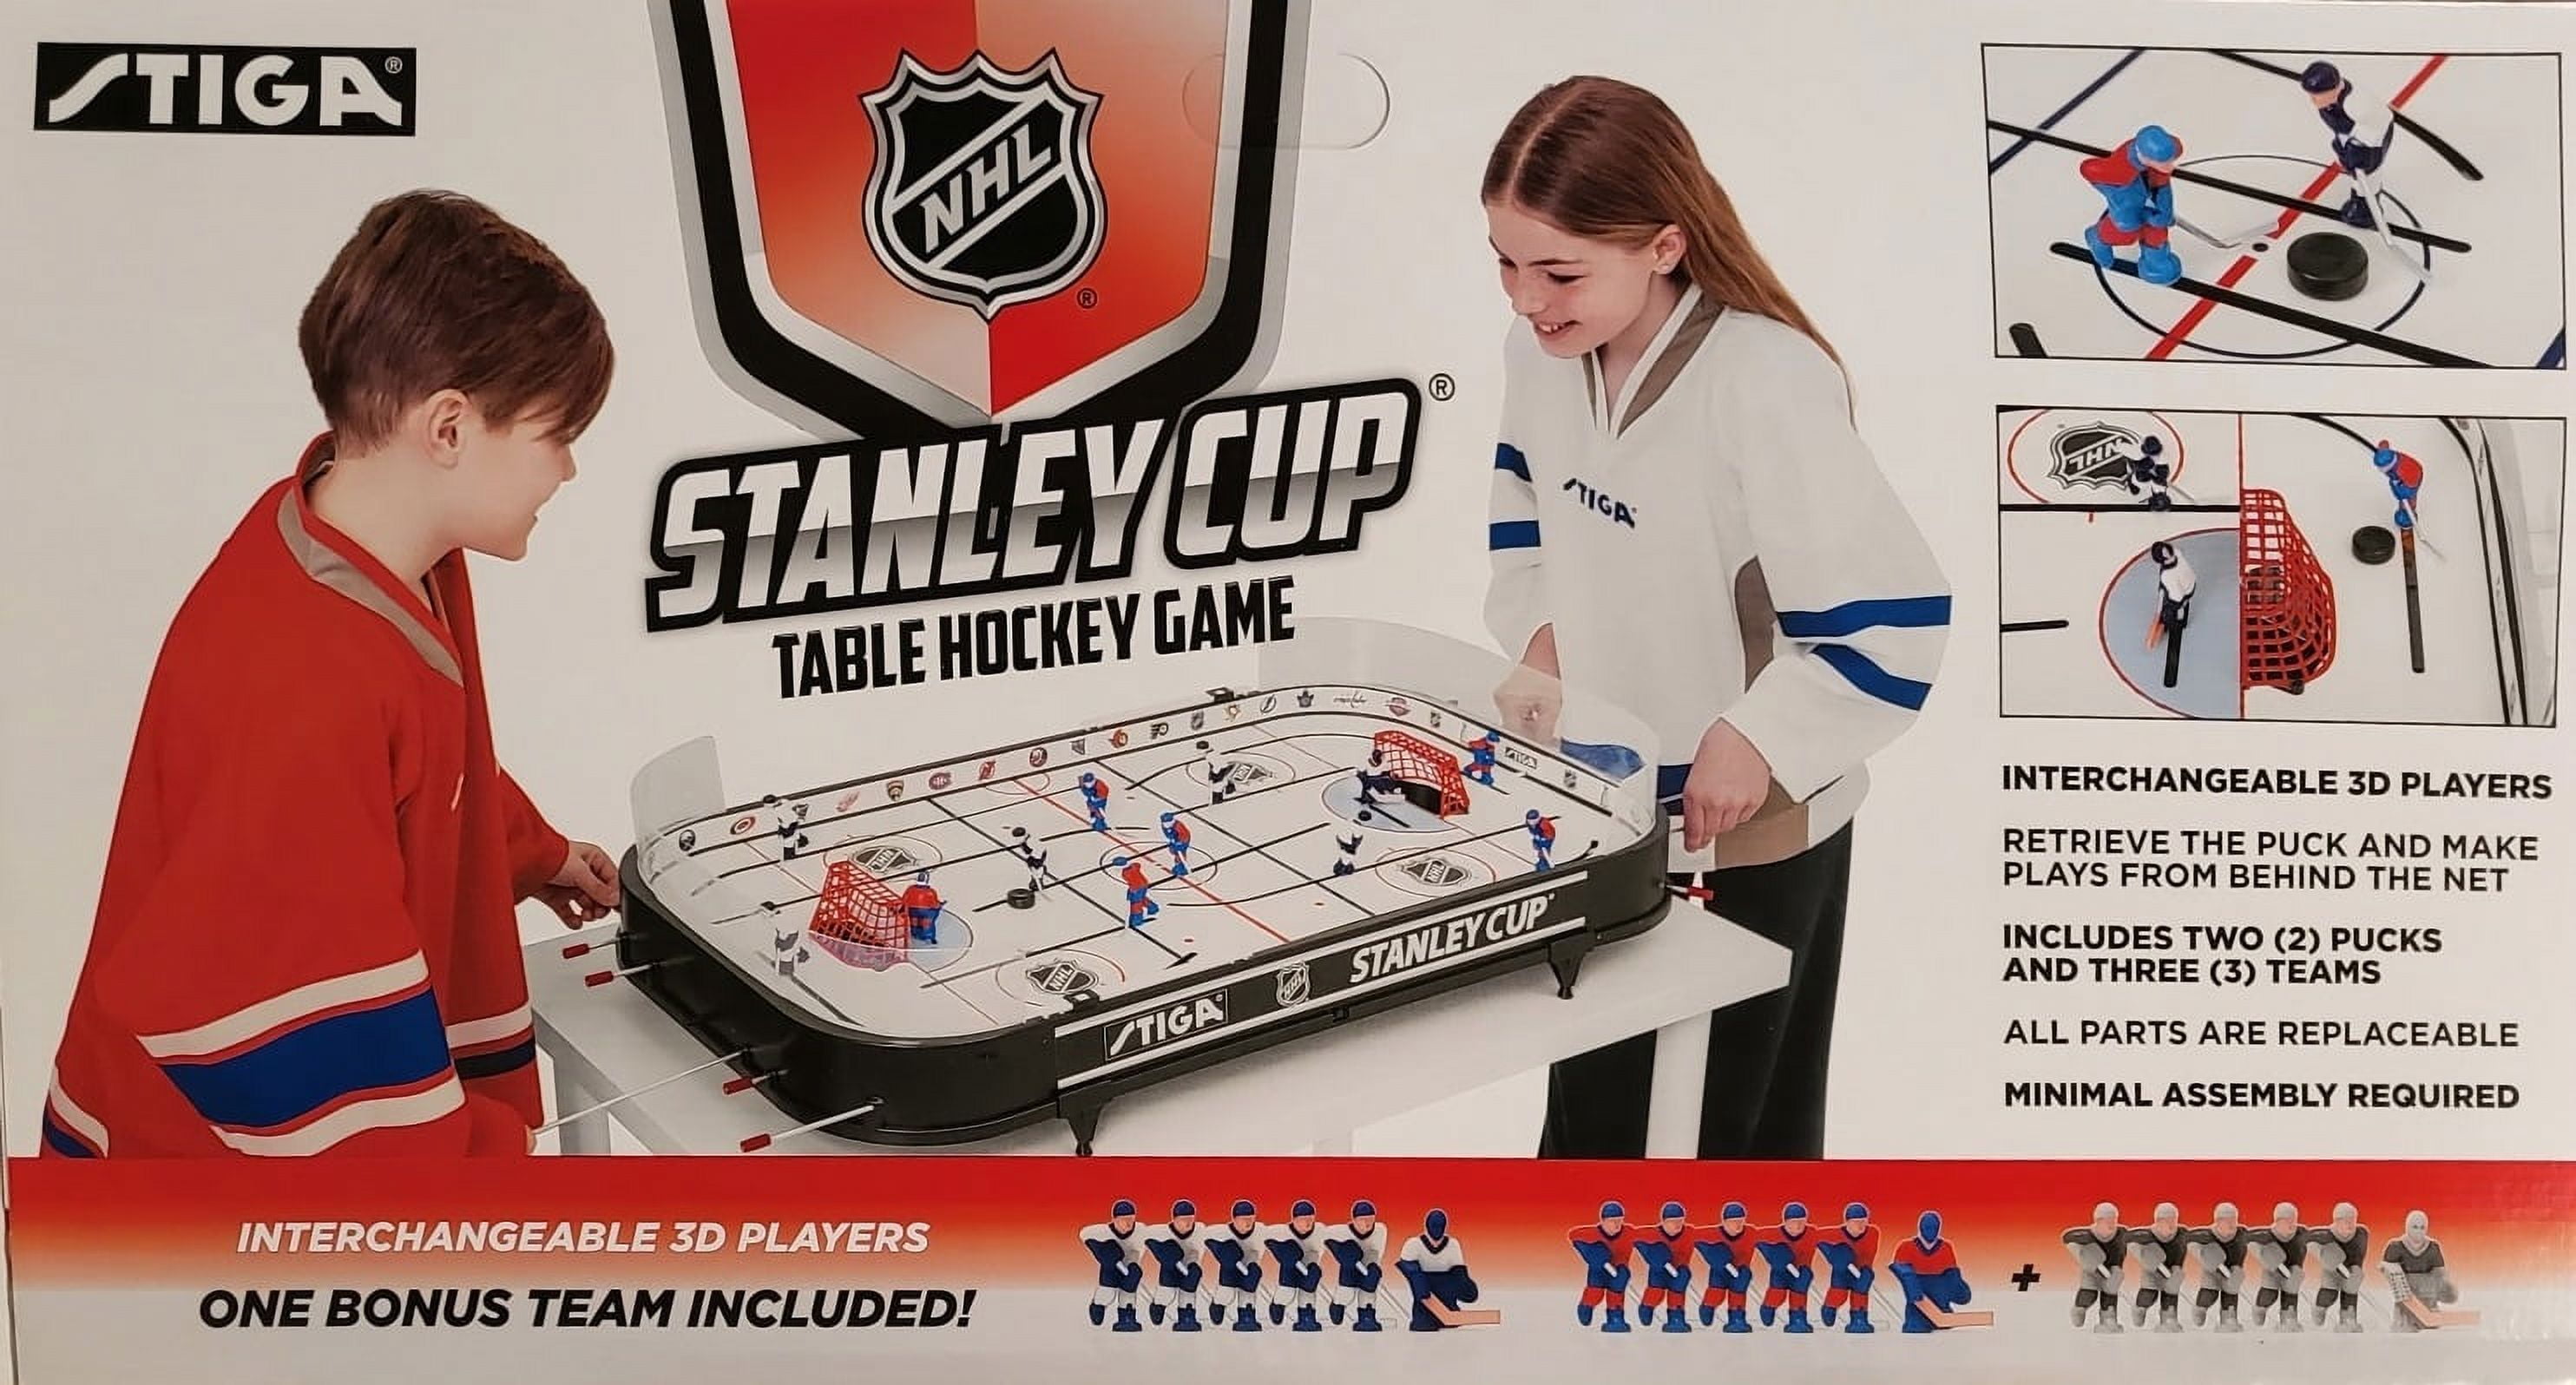 STIGA 3T NHL Stanley Cup Table Hockey Game